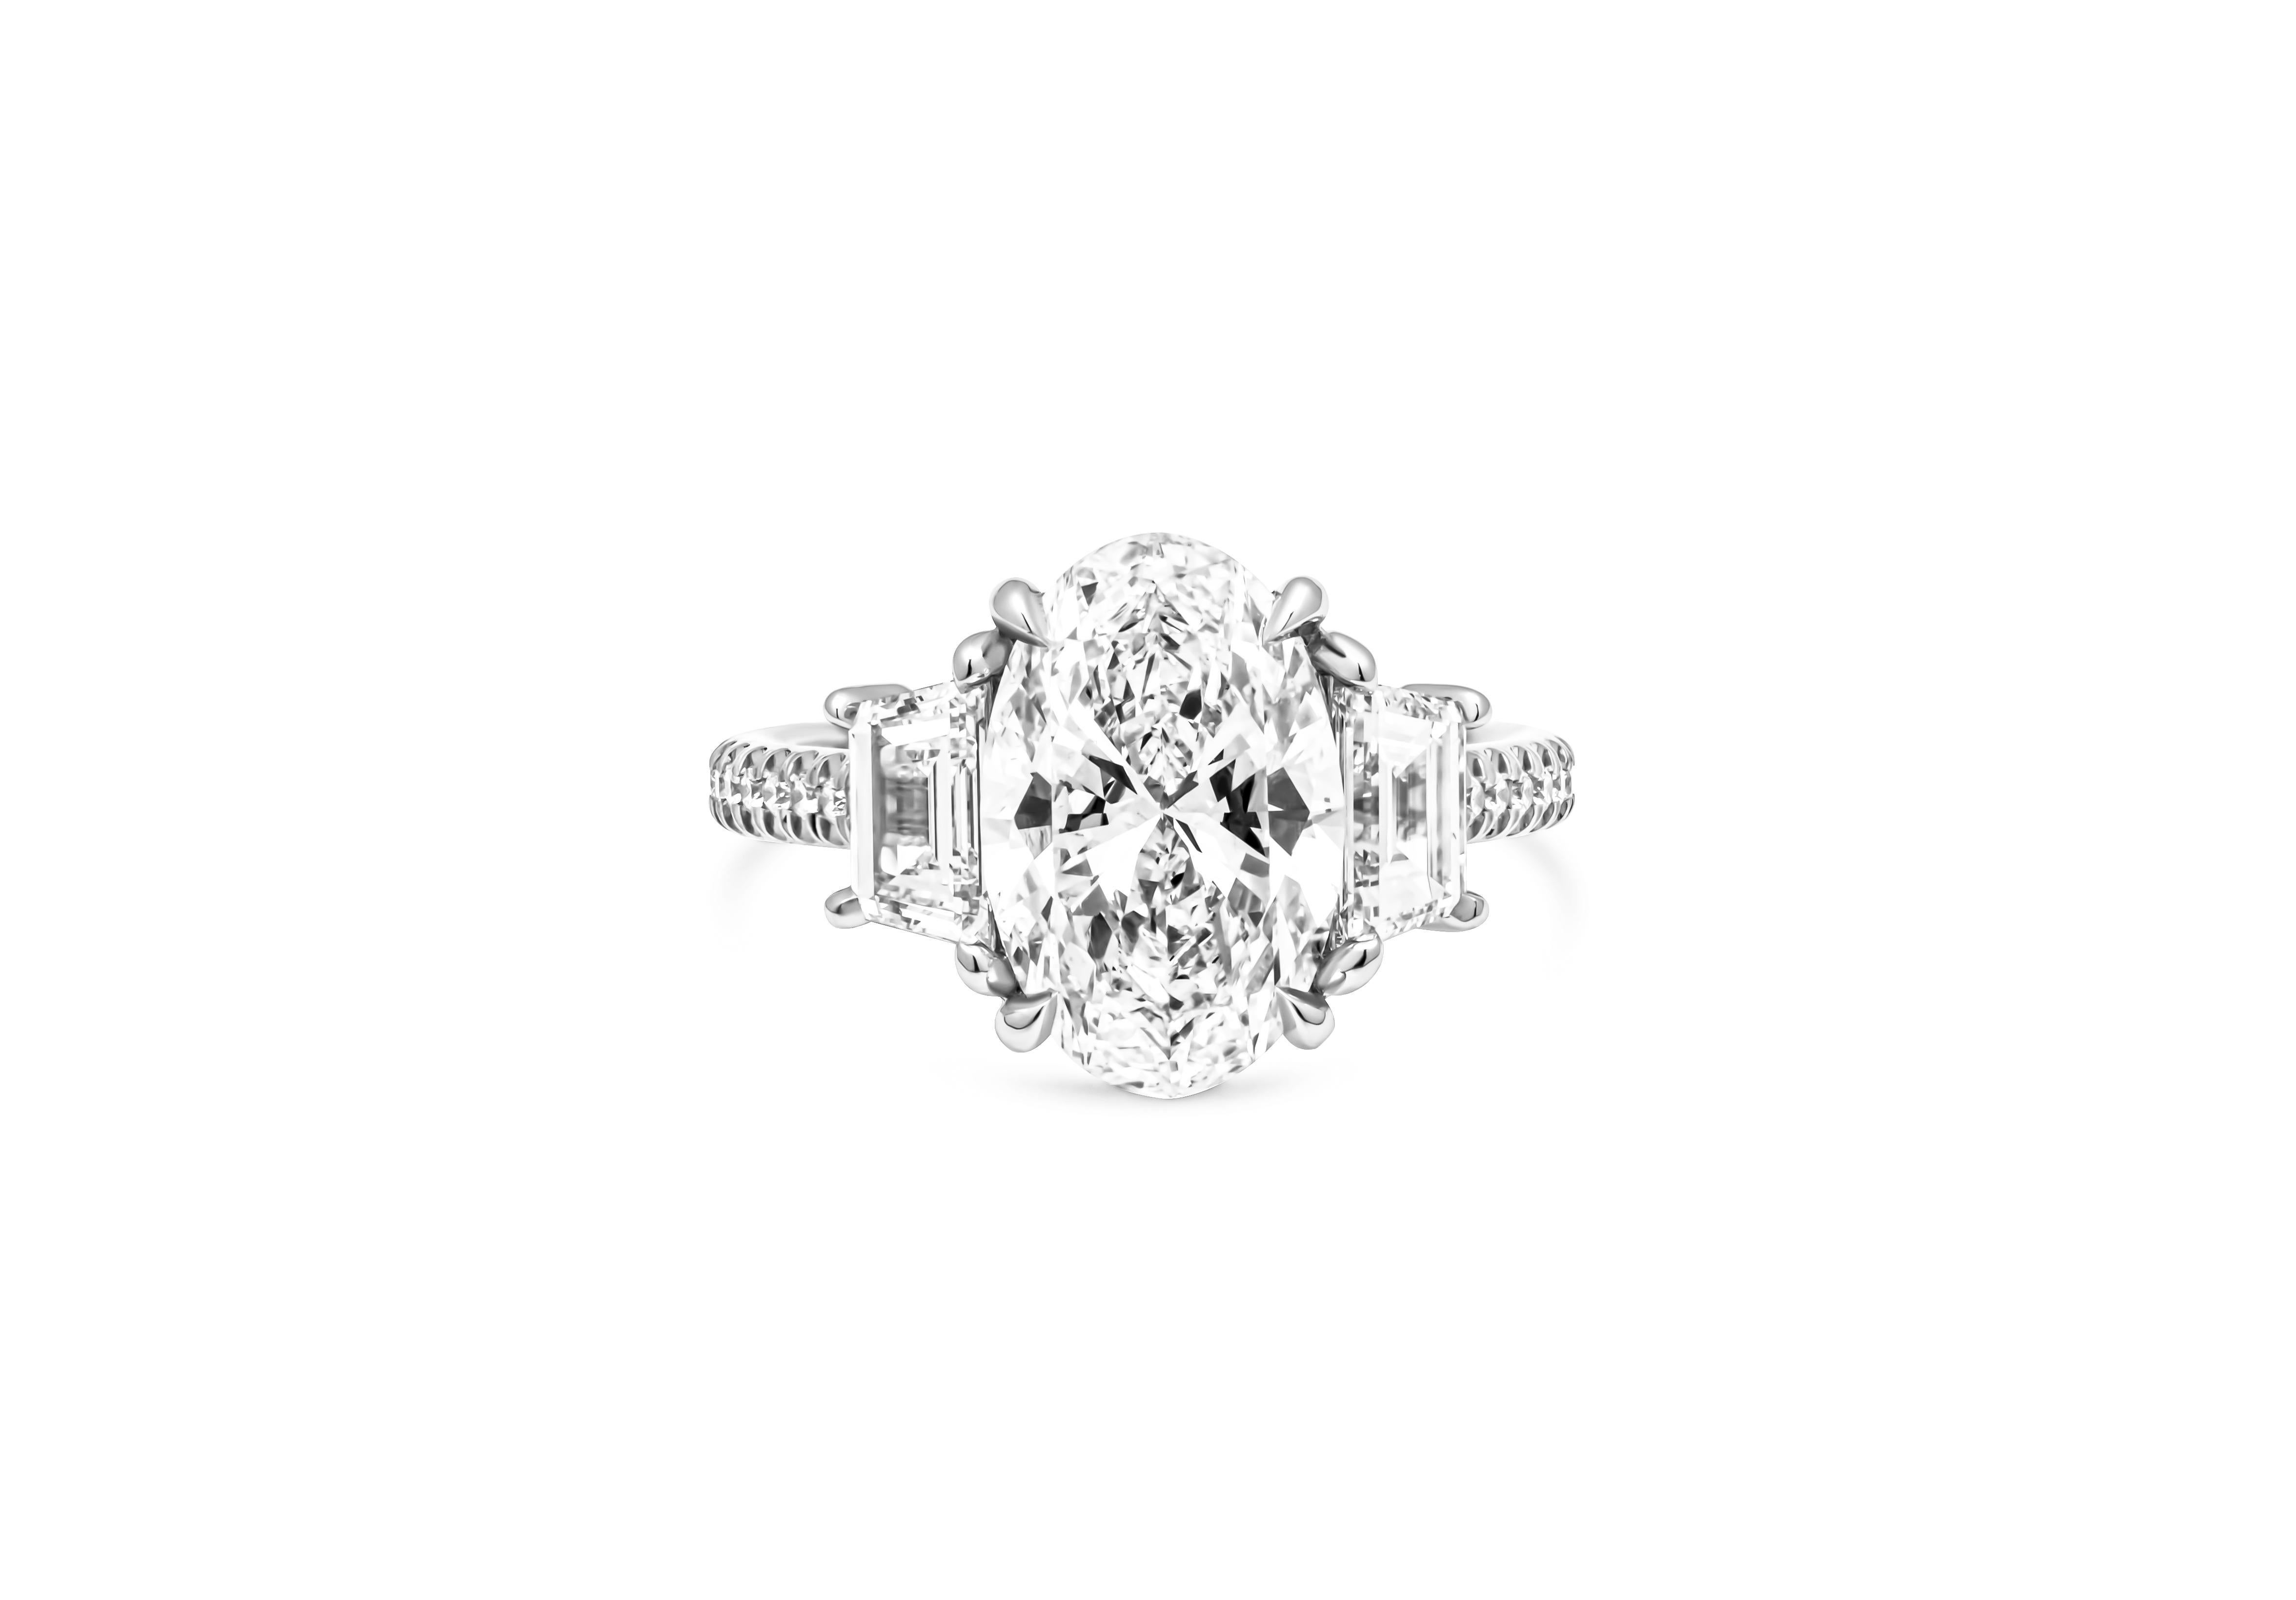 Introducing a breathtaking three-stone ring that effortlessly combines timeless elegance with contemporary sophistication. This exquisite piece features a mesmerizing 3.01-carat oval-cut diamond, certified by the Gemological Institute of America